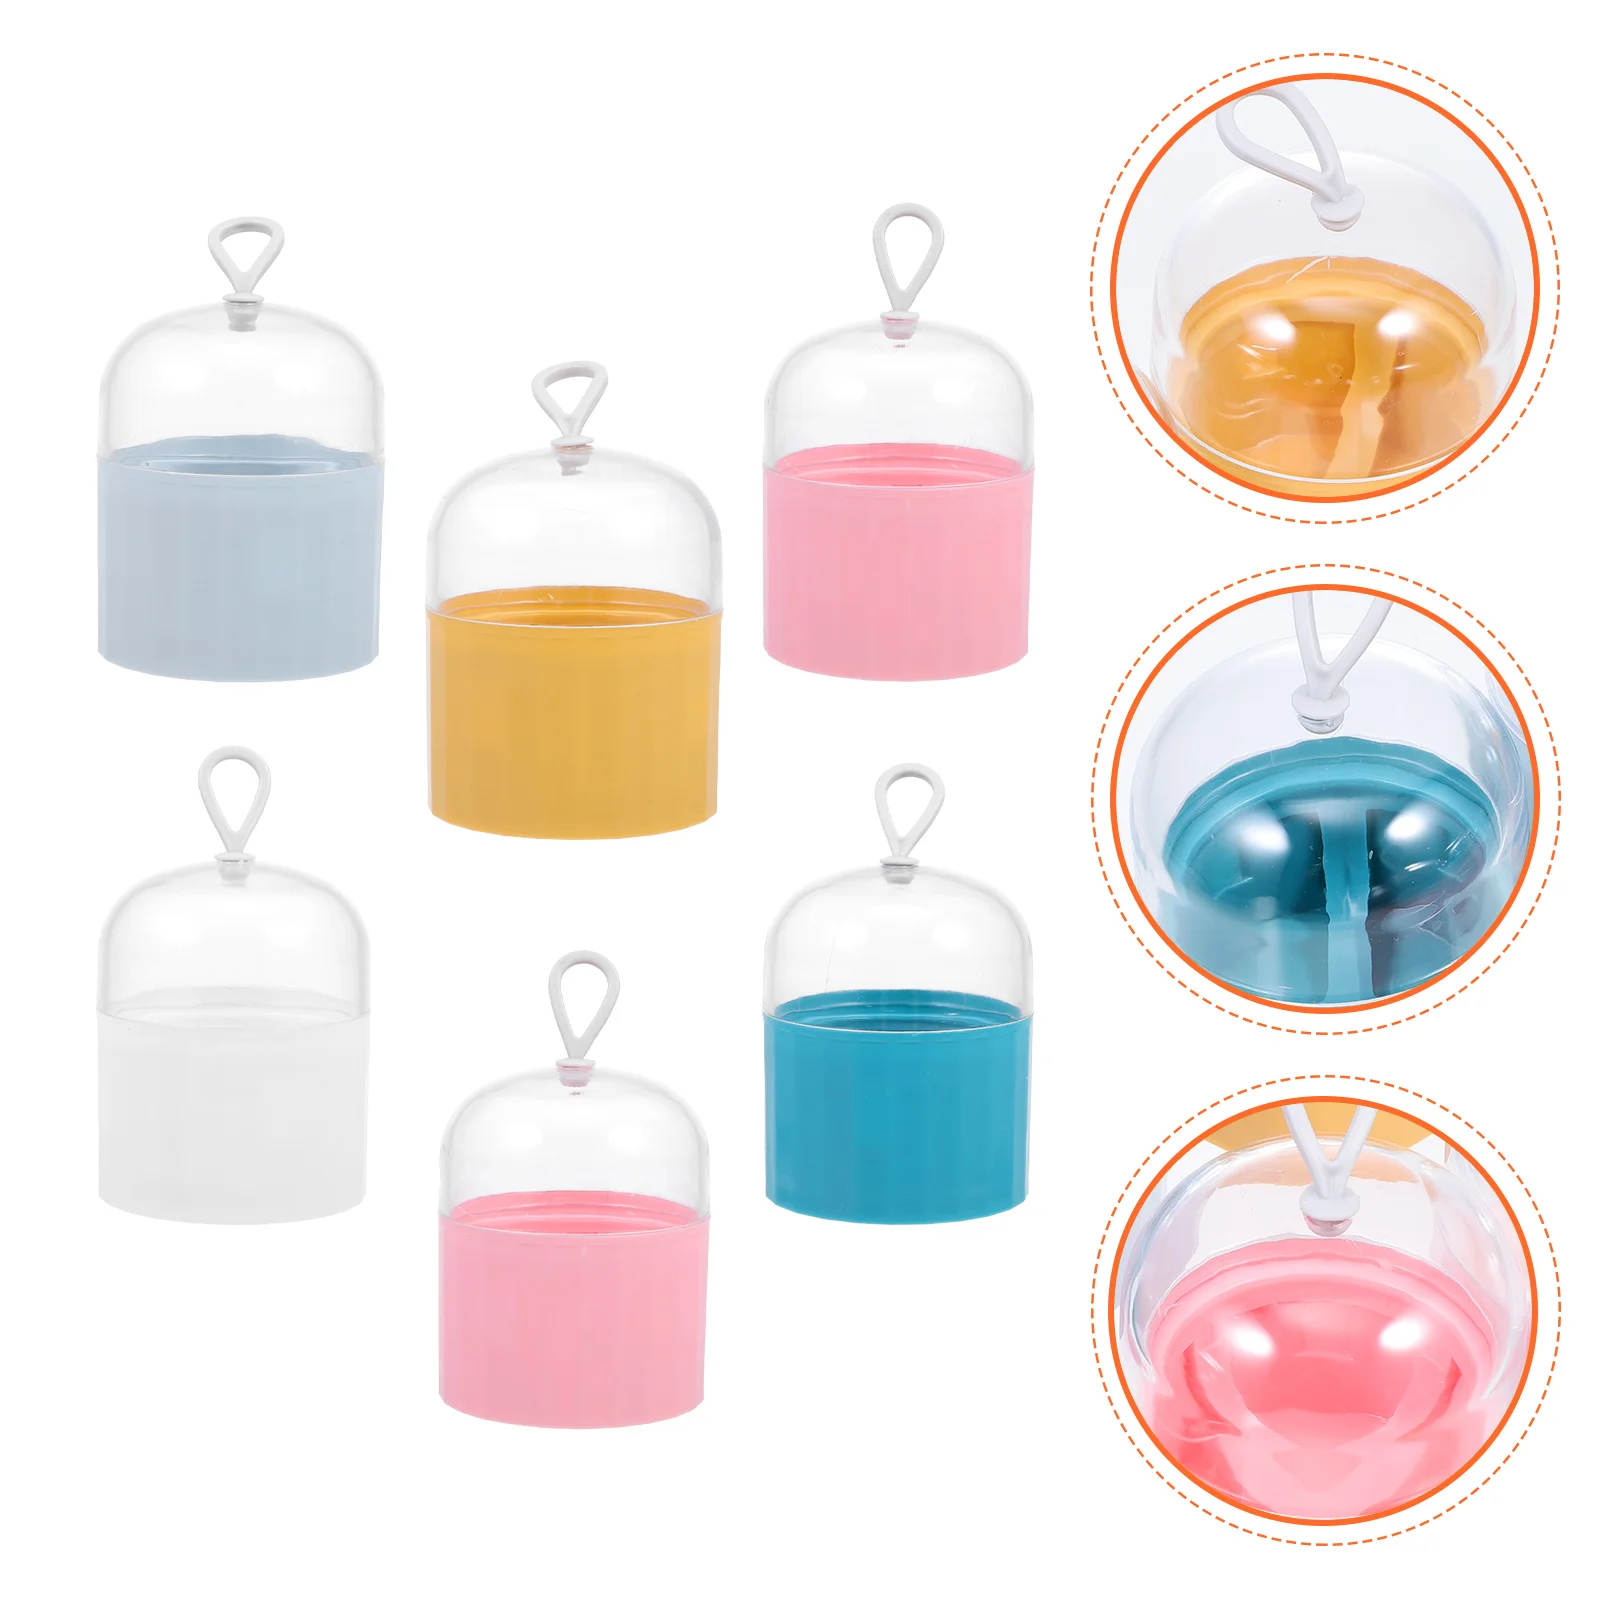 

6Pcs Beauty Egg Cases Makeup Blender Holders Cosmetic Egg Containers Travel Accessory (Mixed Color)